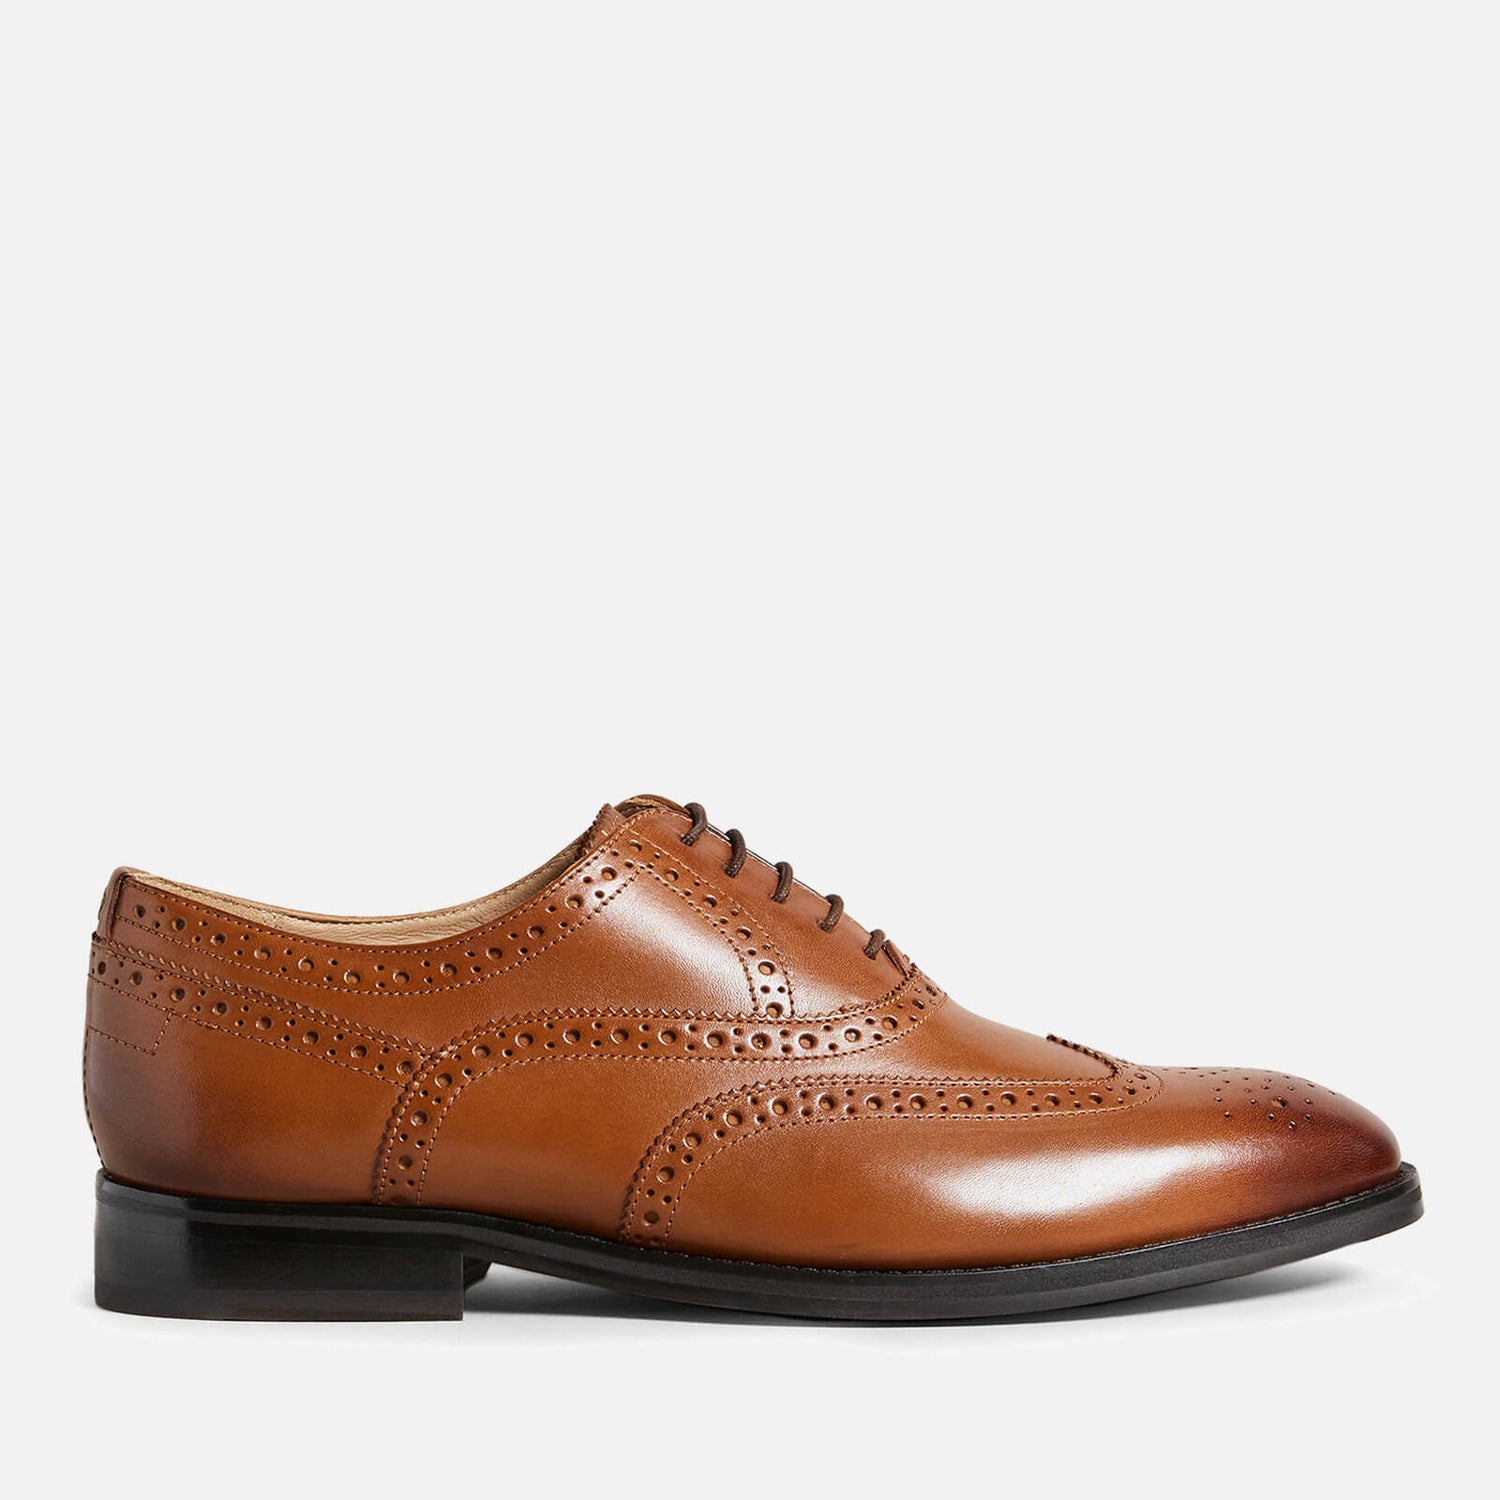 Ted Baker Amaiss Leather Brogues - UK 7